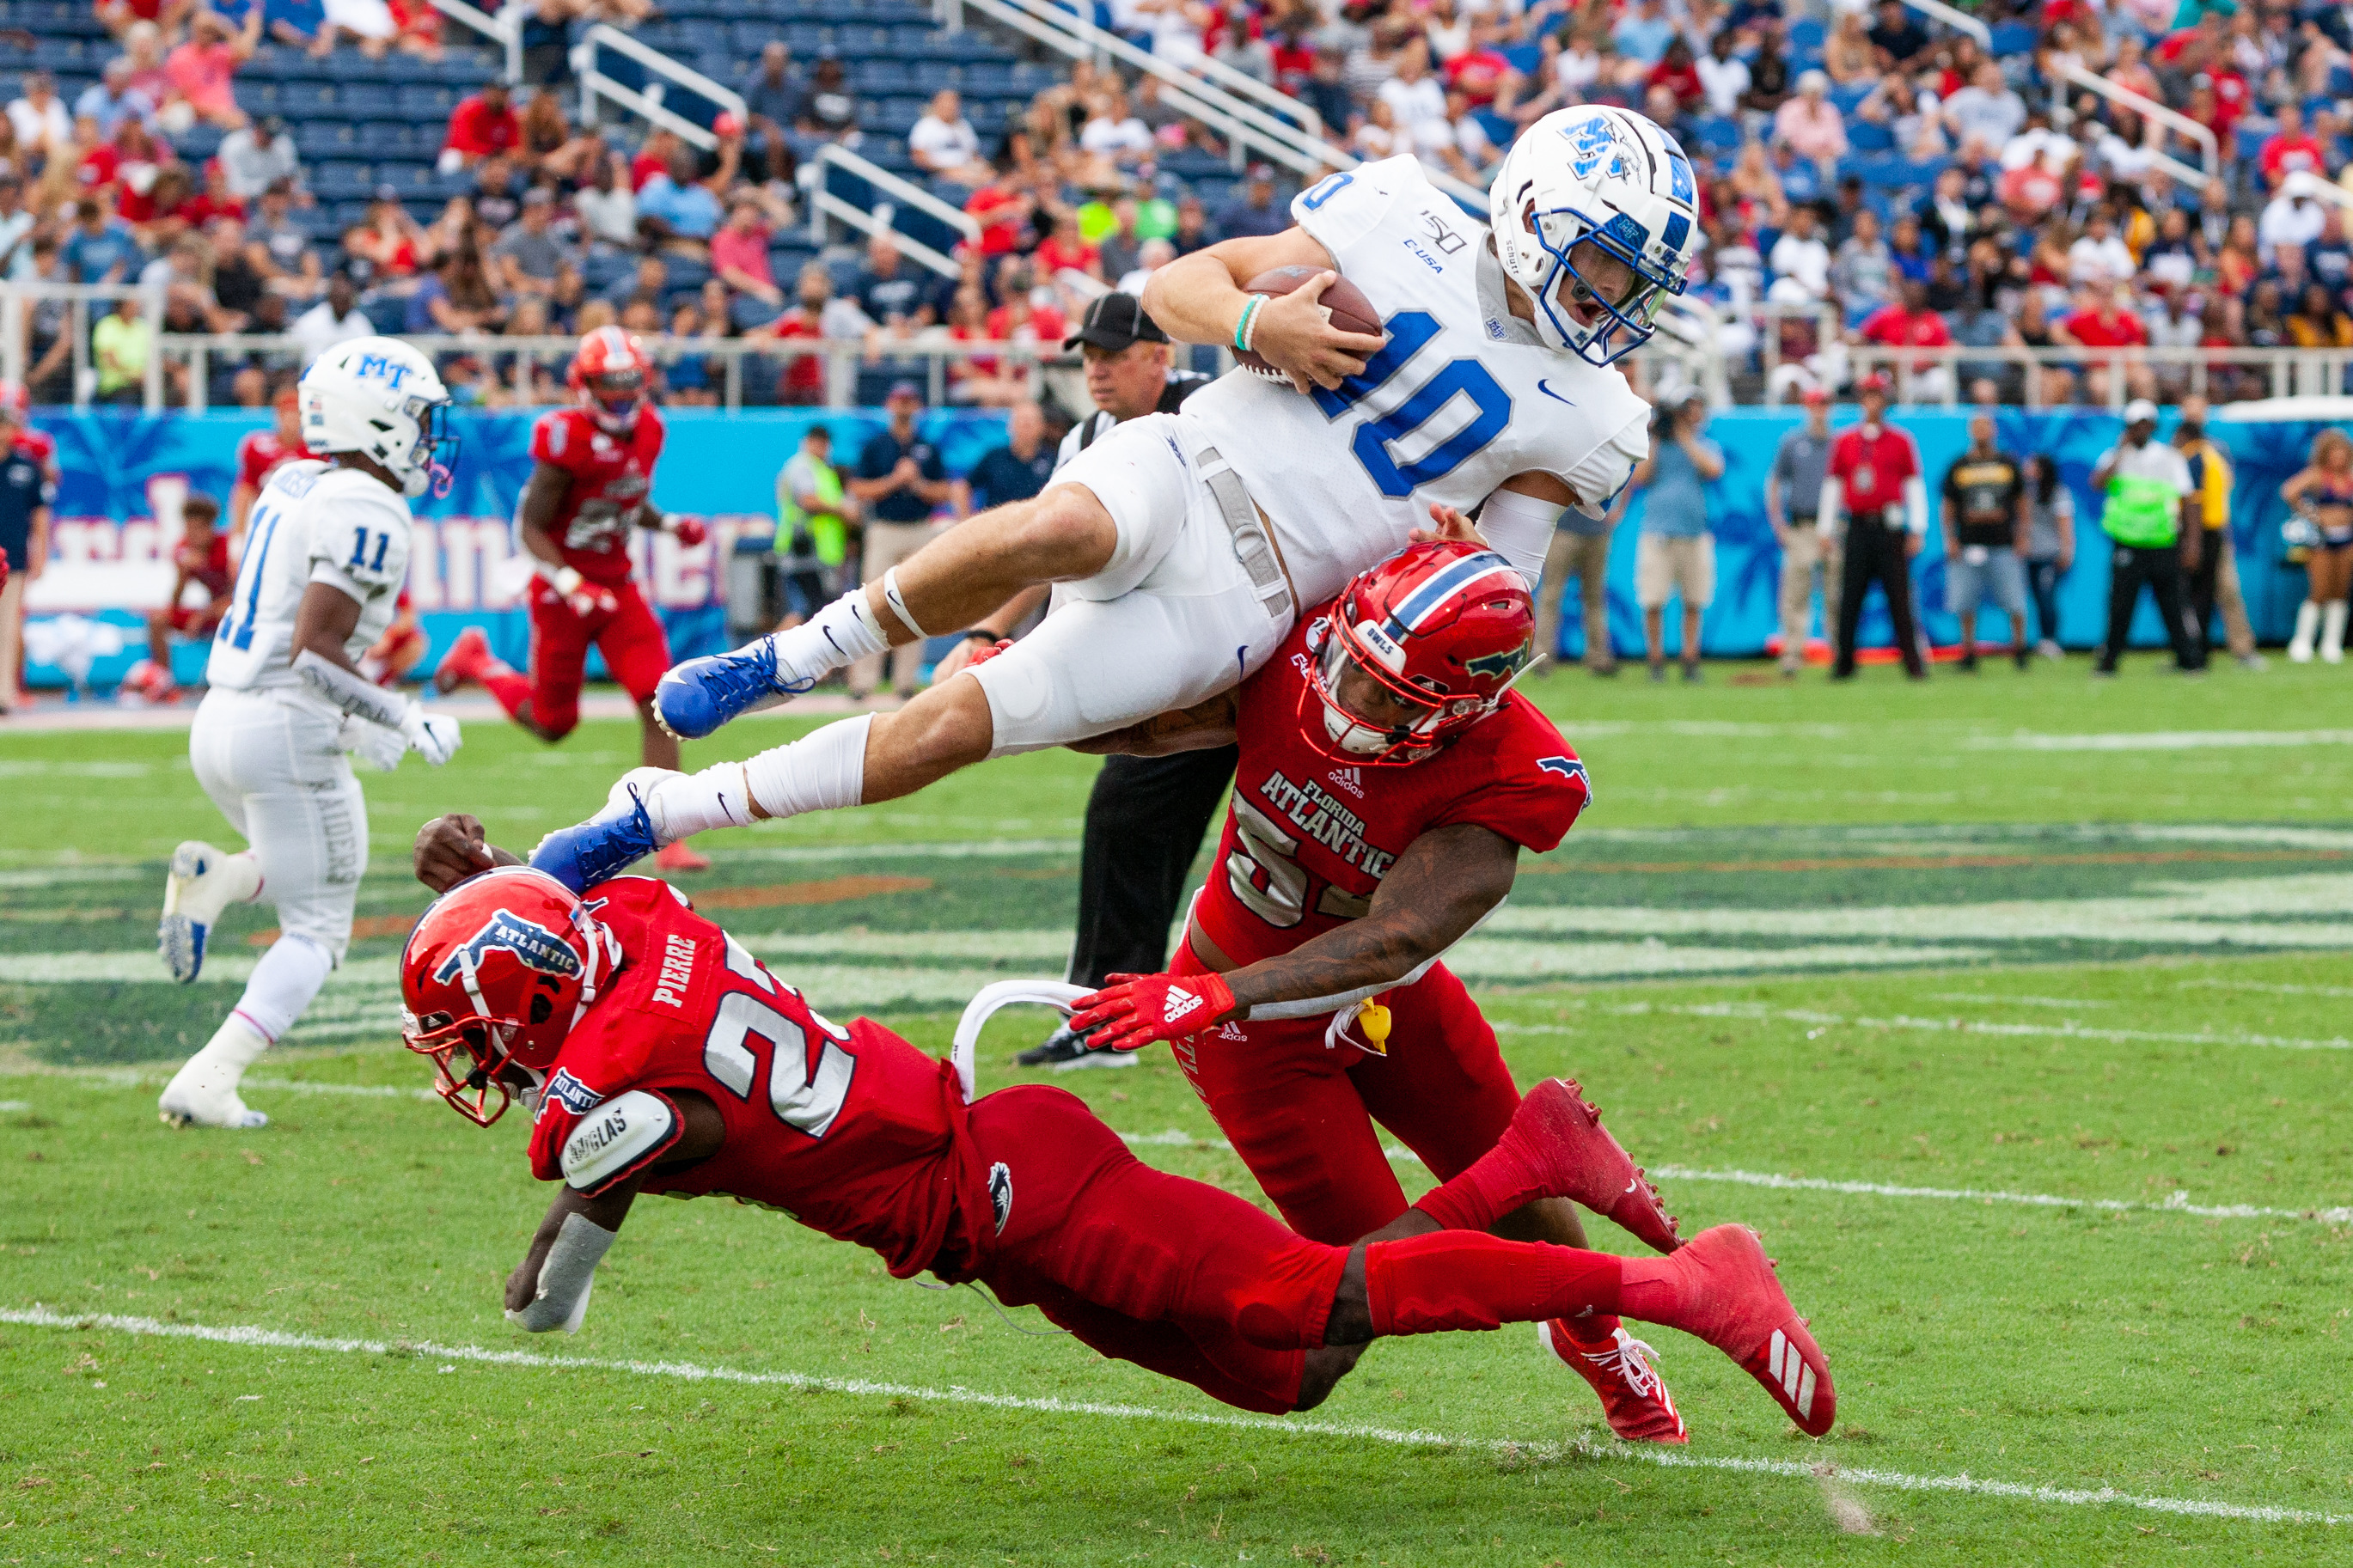 COLLEGE FOOTBALL: OCT 12 Middle Tennessee at FAU